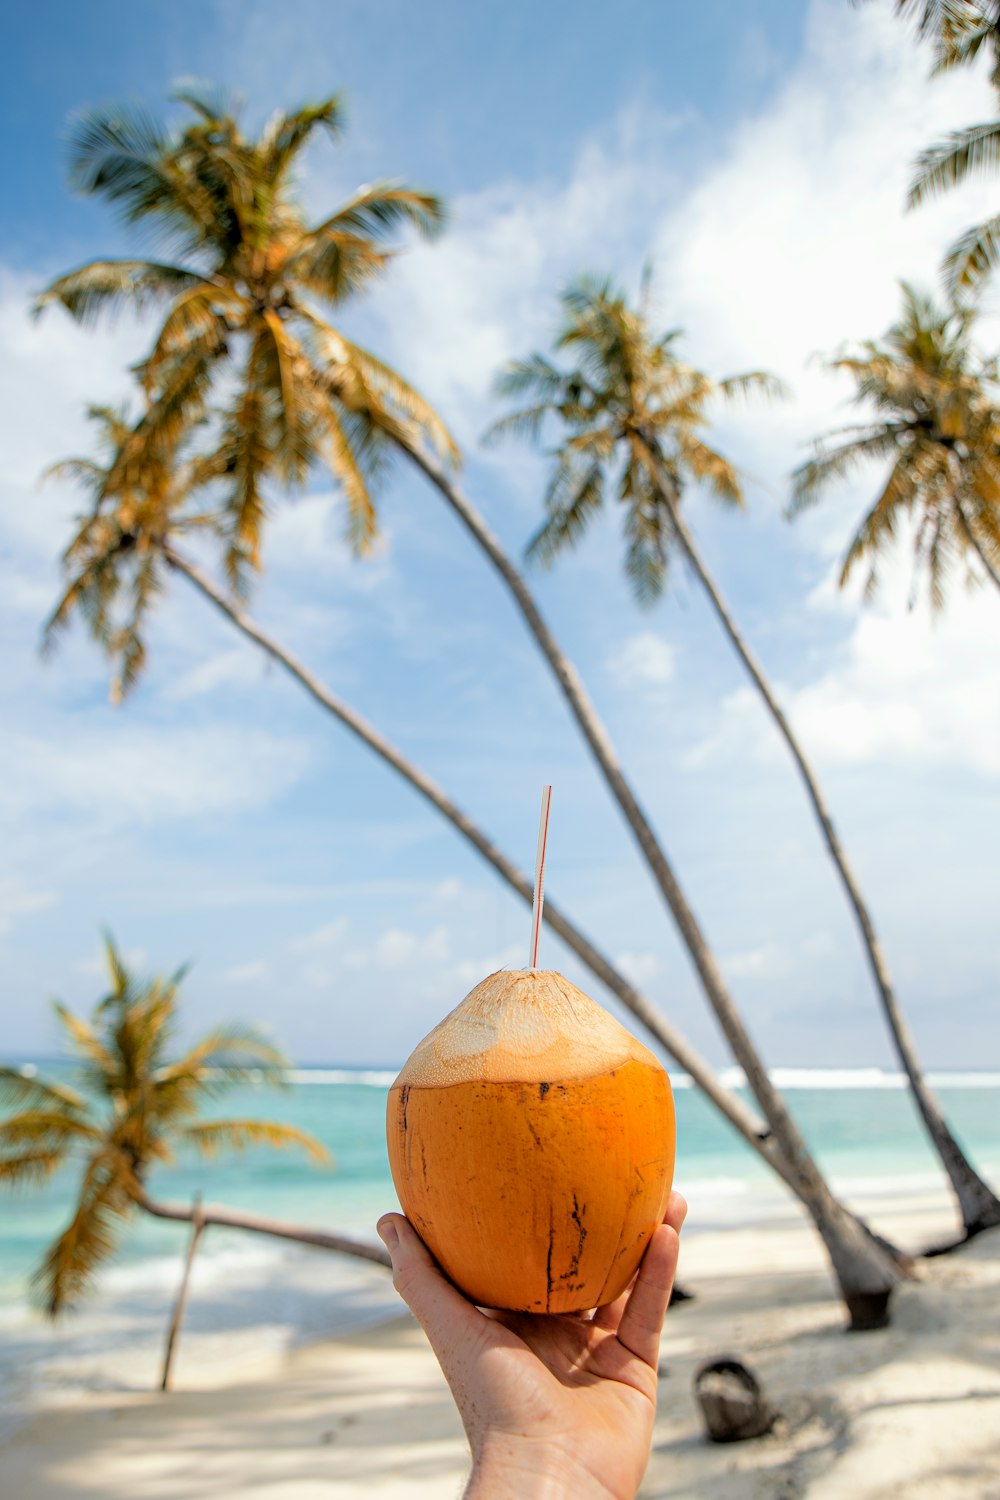 a person holding up a coconut on a beach